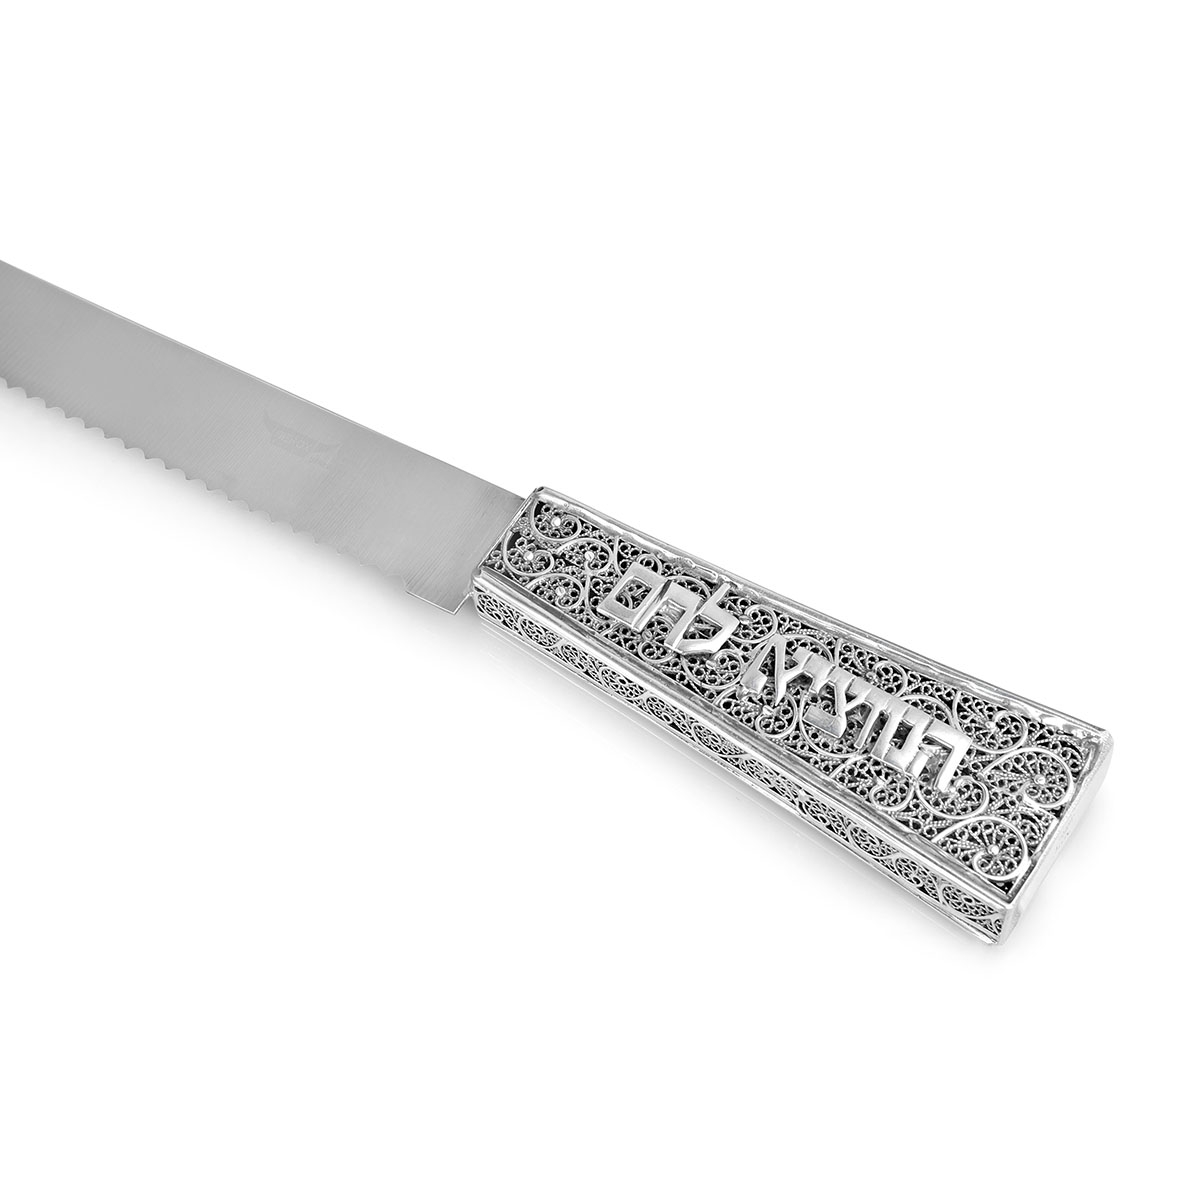 Traditional Yemenite Art Handcrafted Sterling Silver "Hamotzi" Challah Knife With Filigree Design - 1